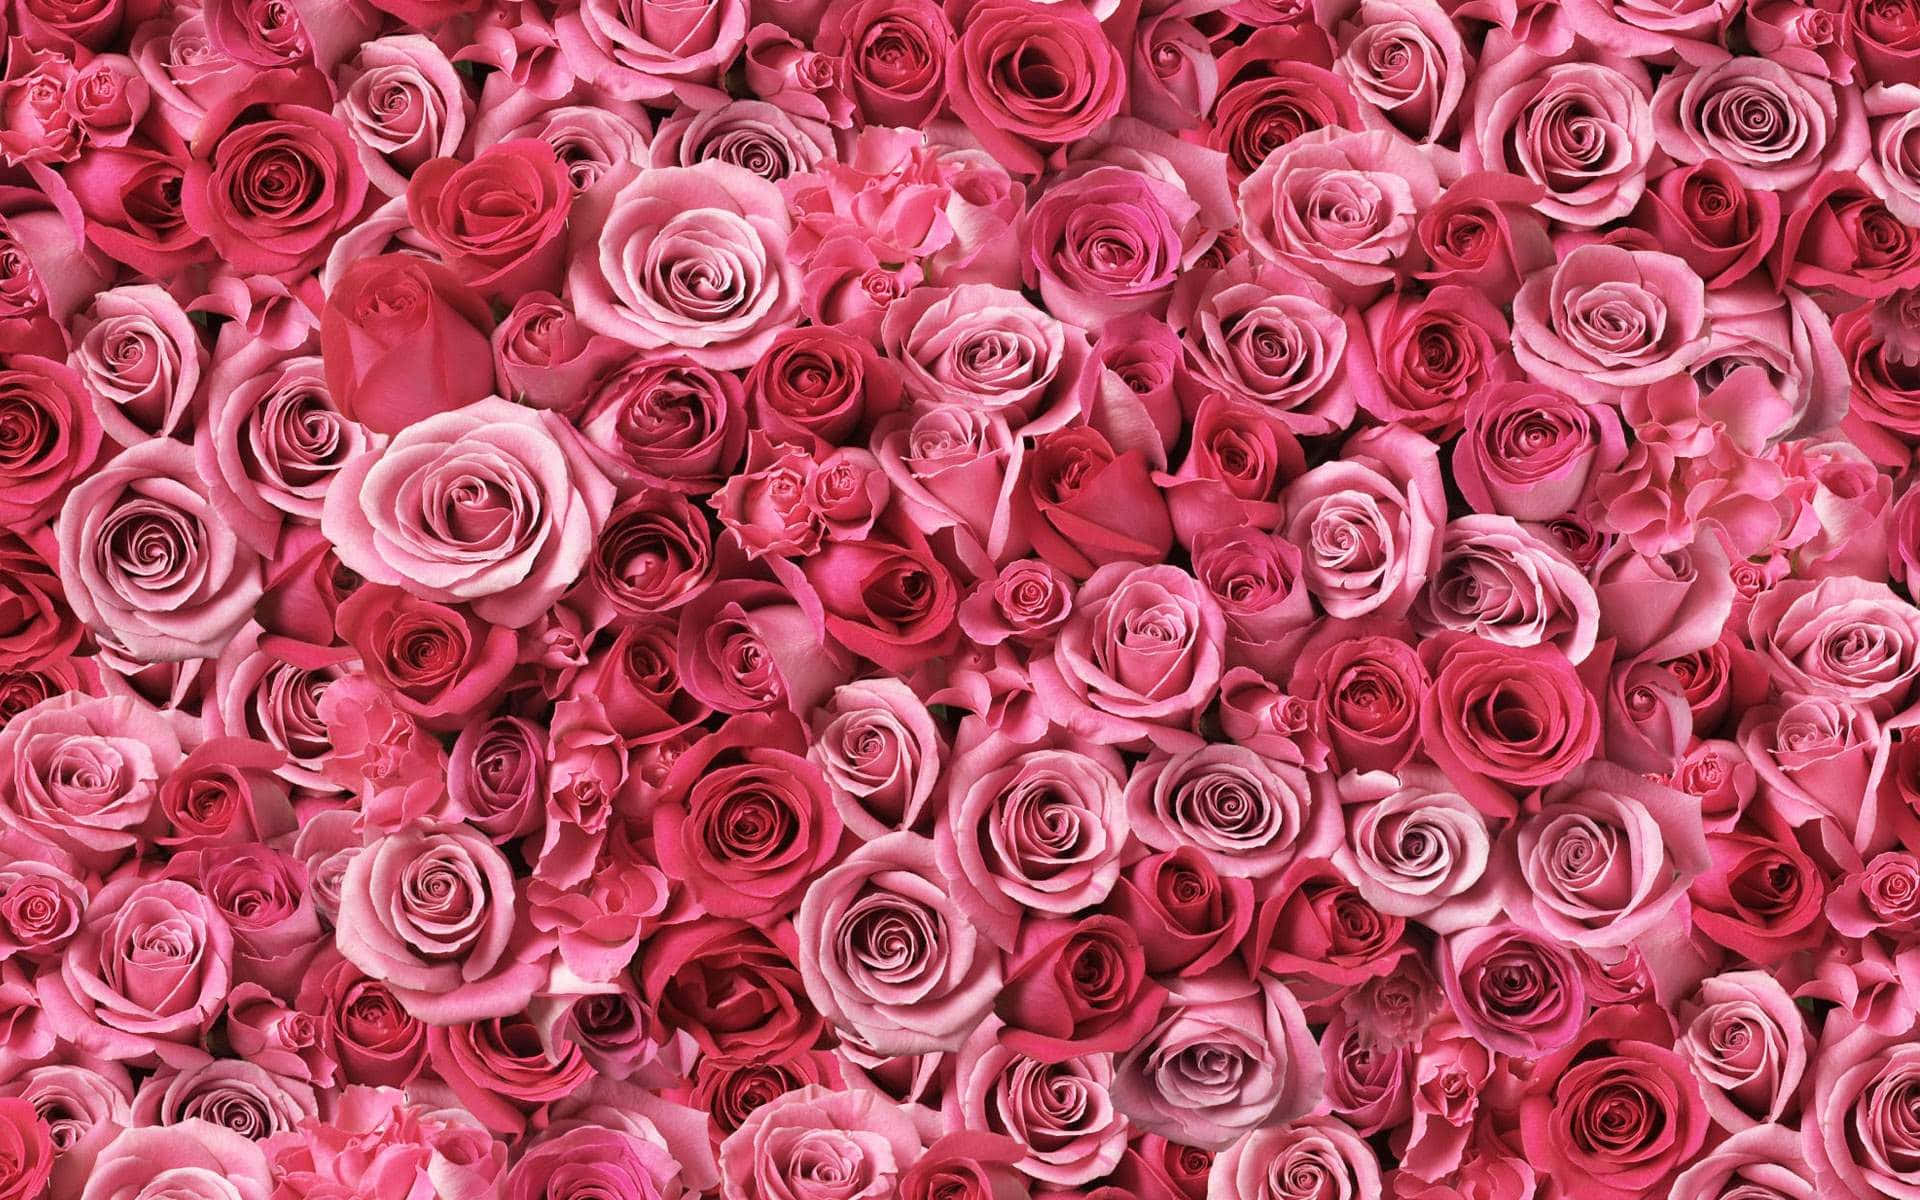 Captivating Display of Pink Roses Background